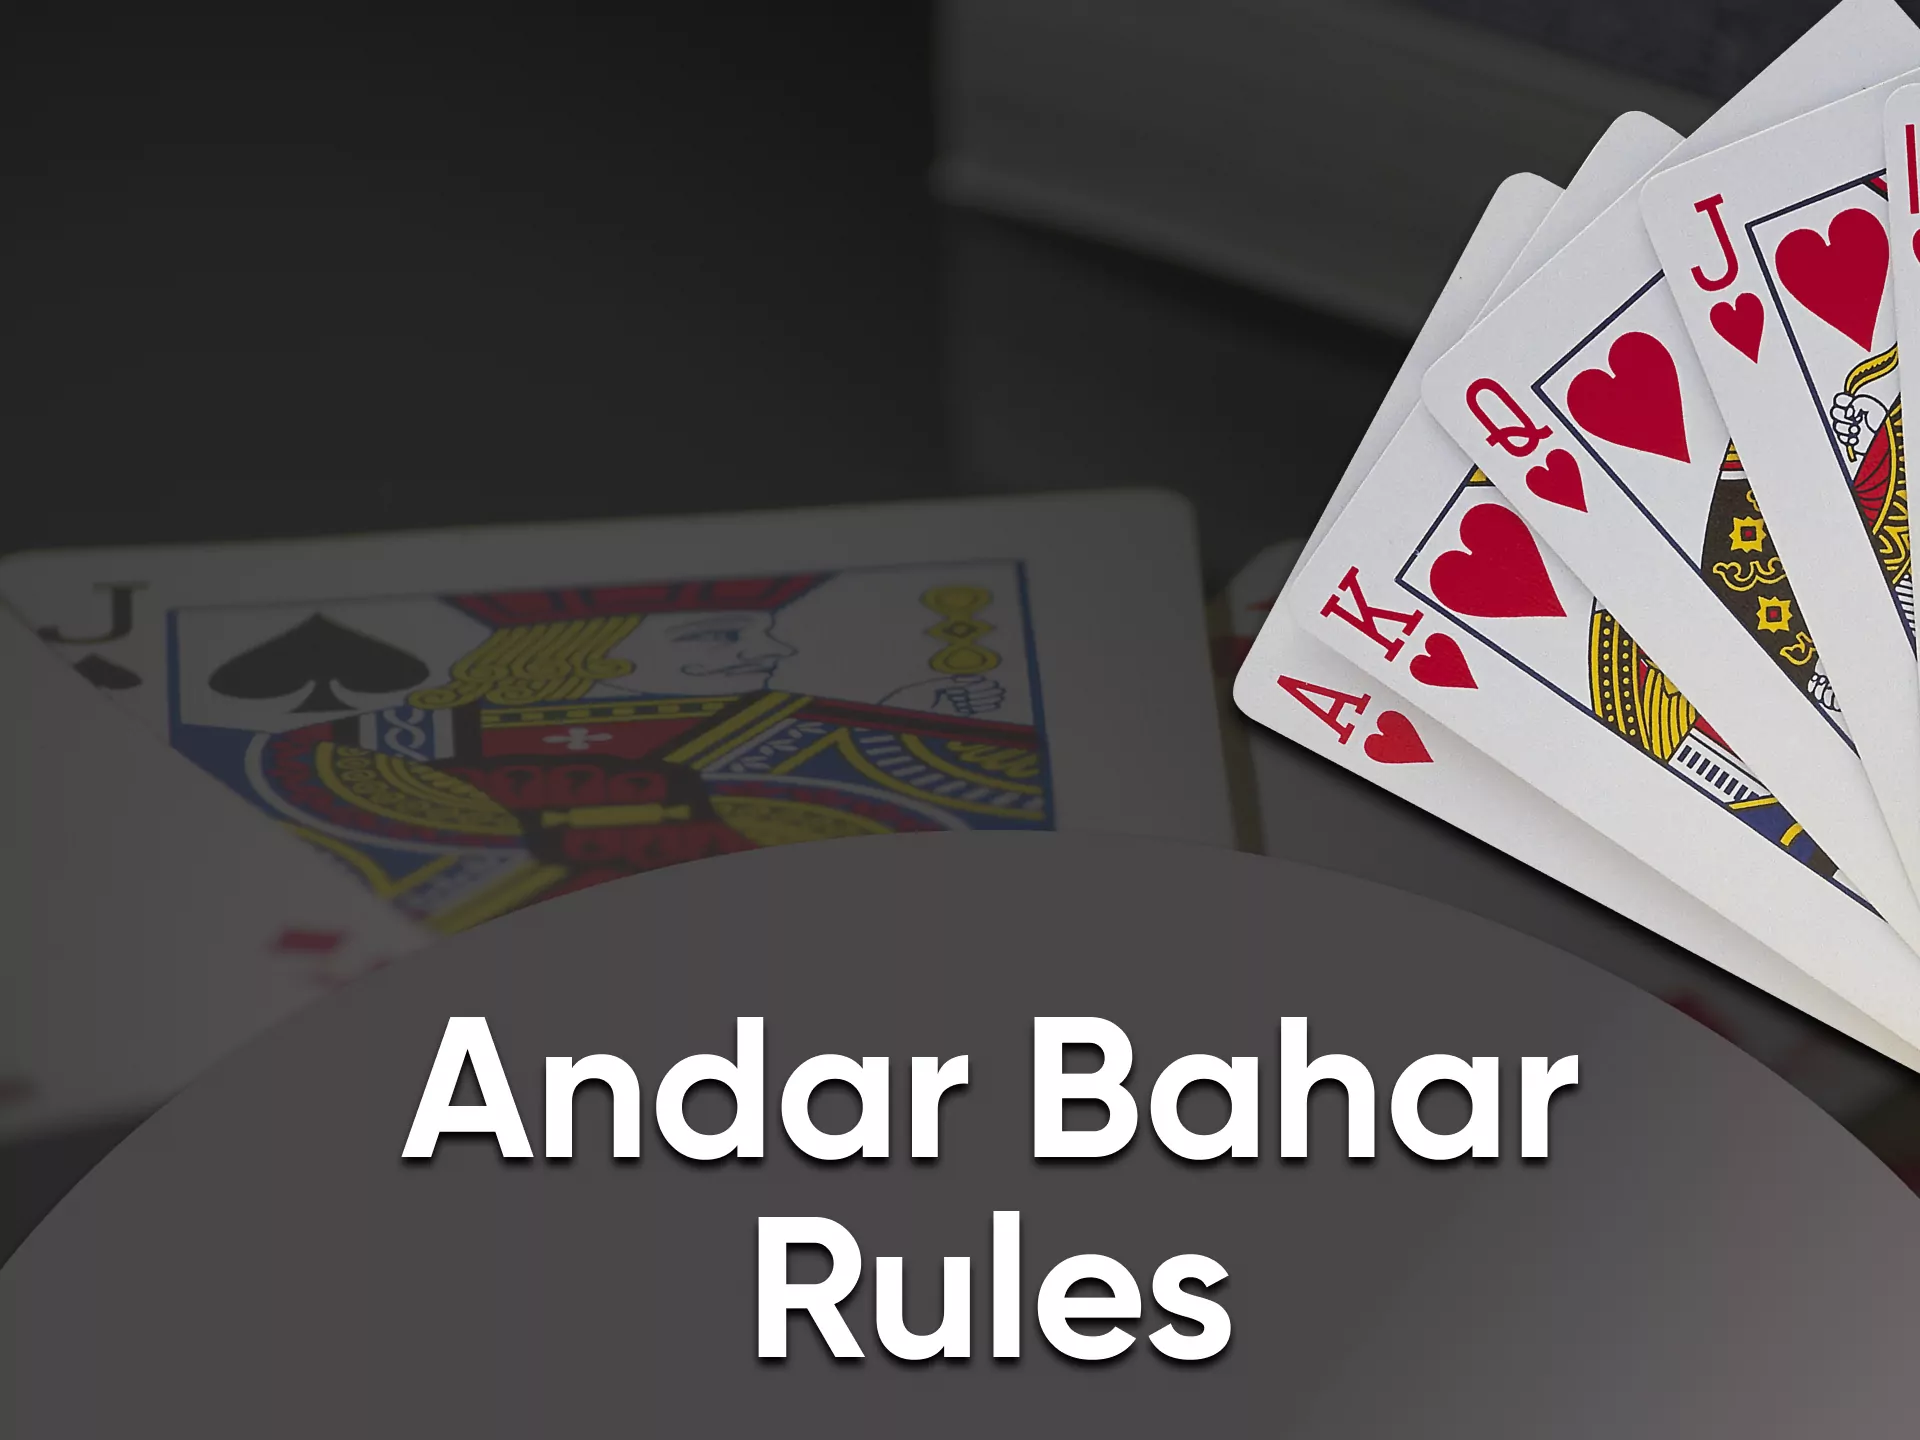 Learn the rules of playing Andar Bahar.